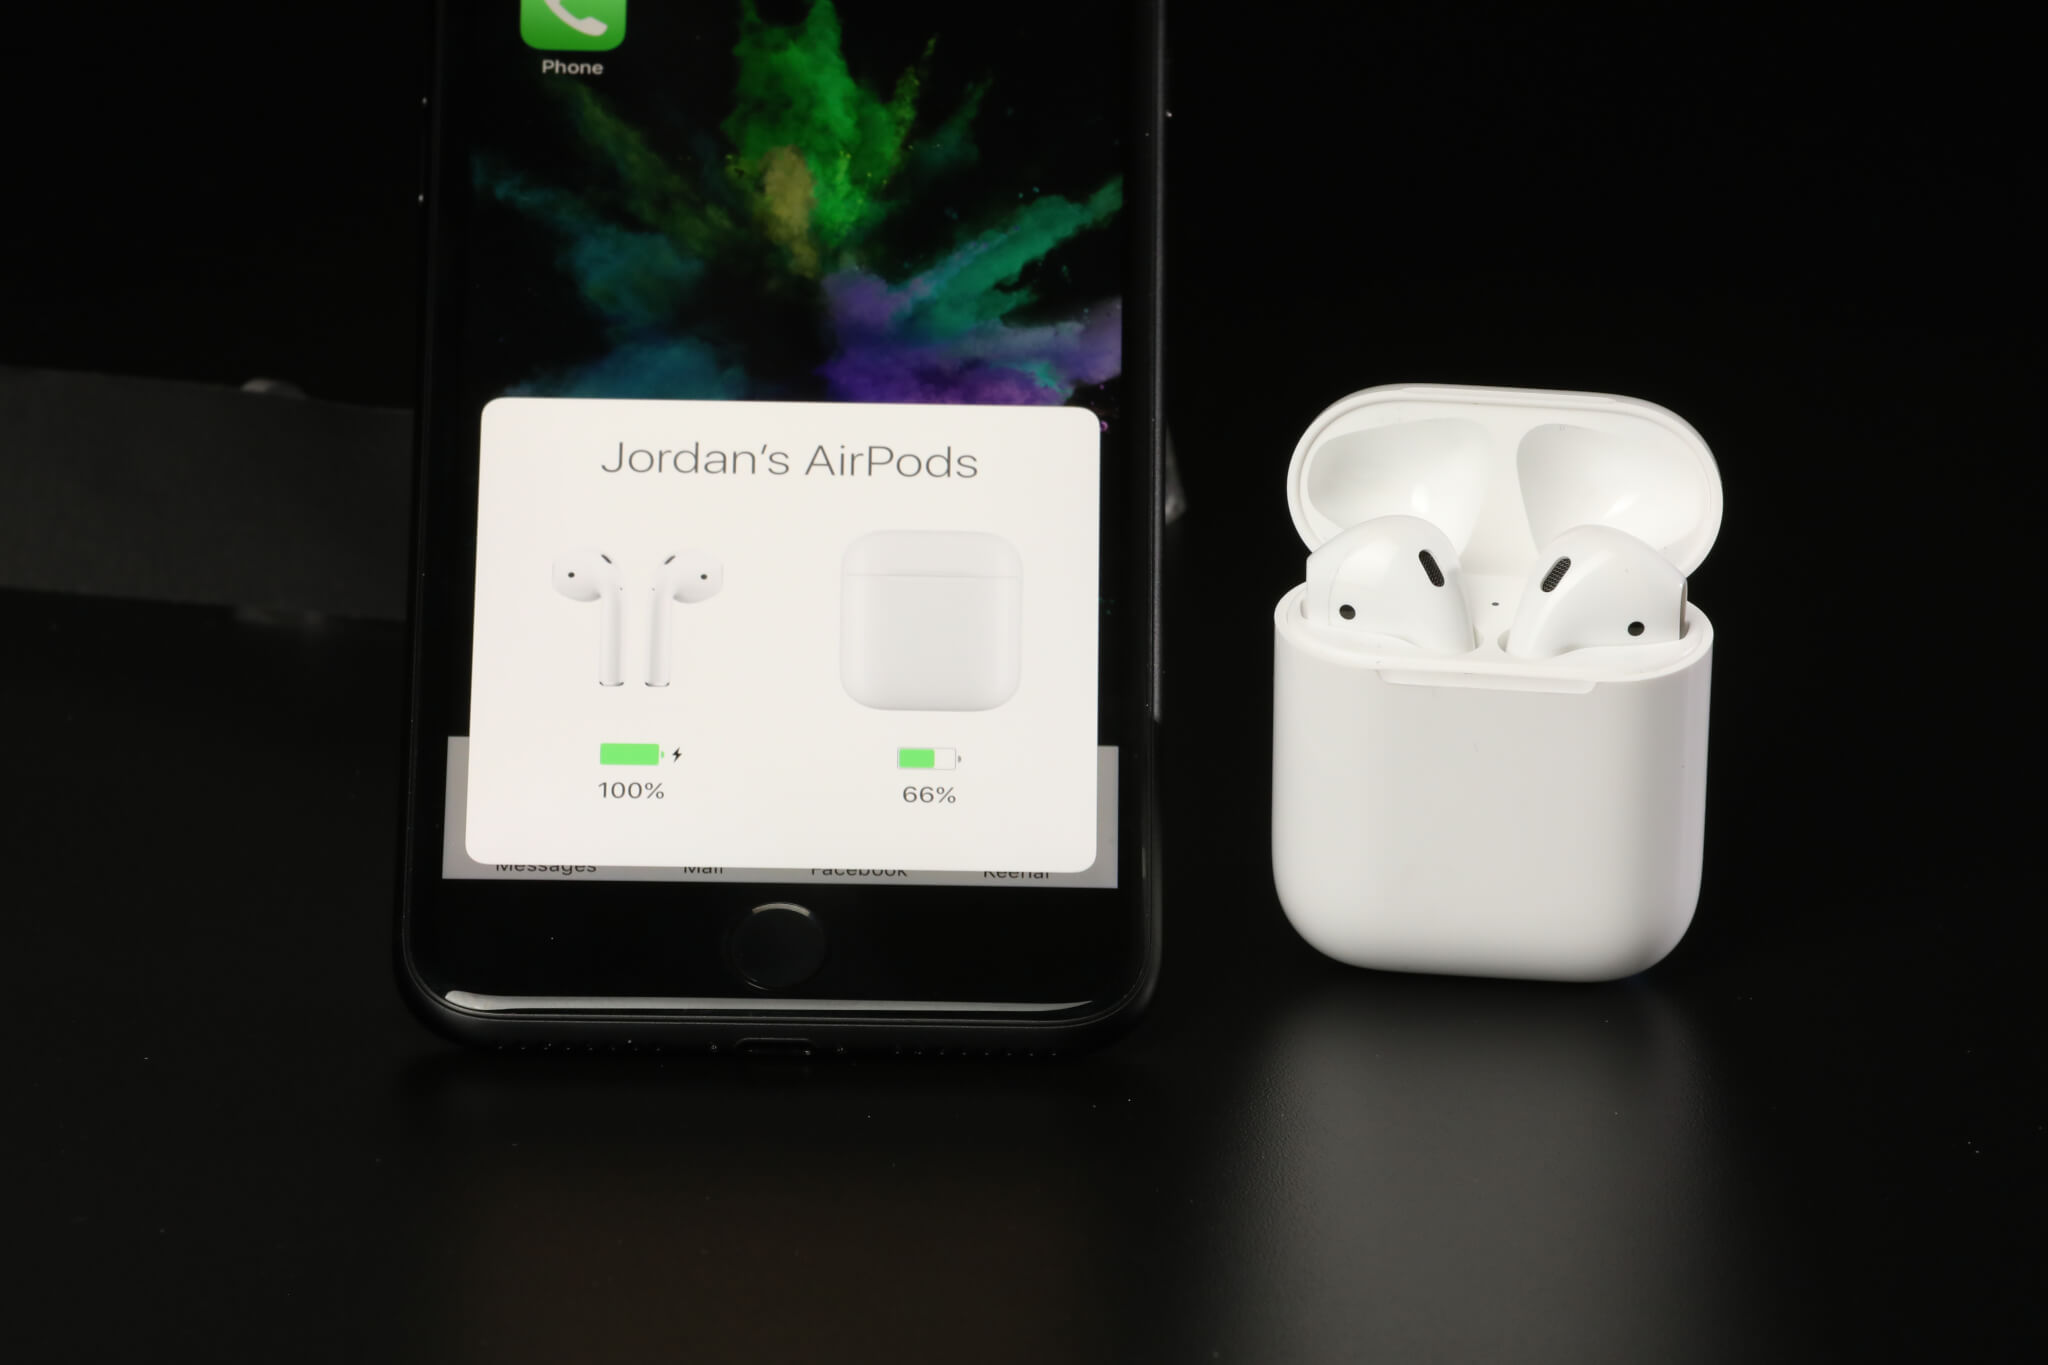 AirPods in case and the box that pops up when the case is nearby to show remaining battery life.